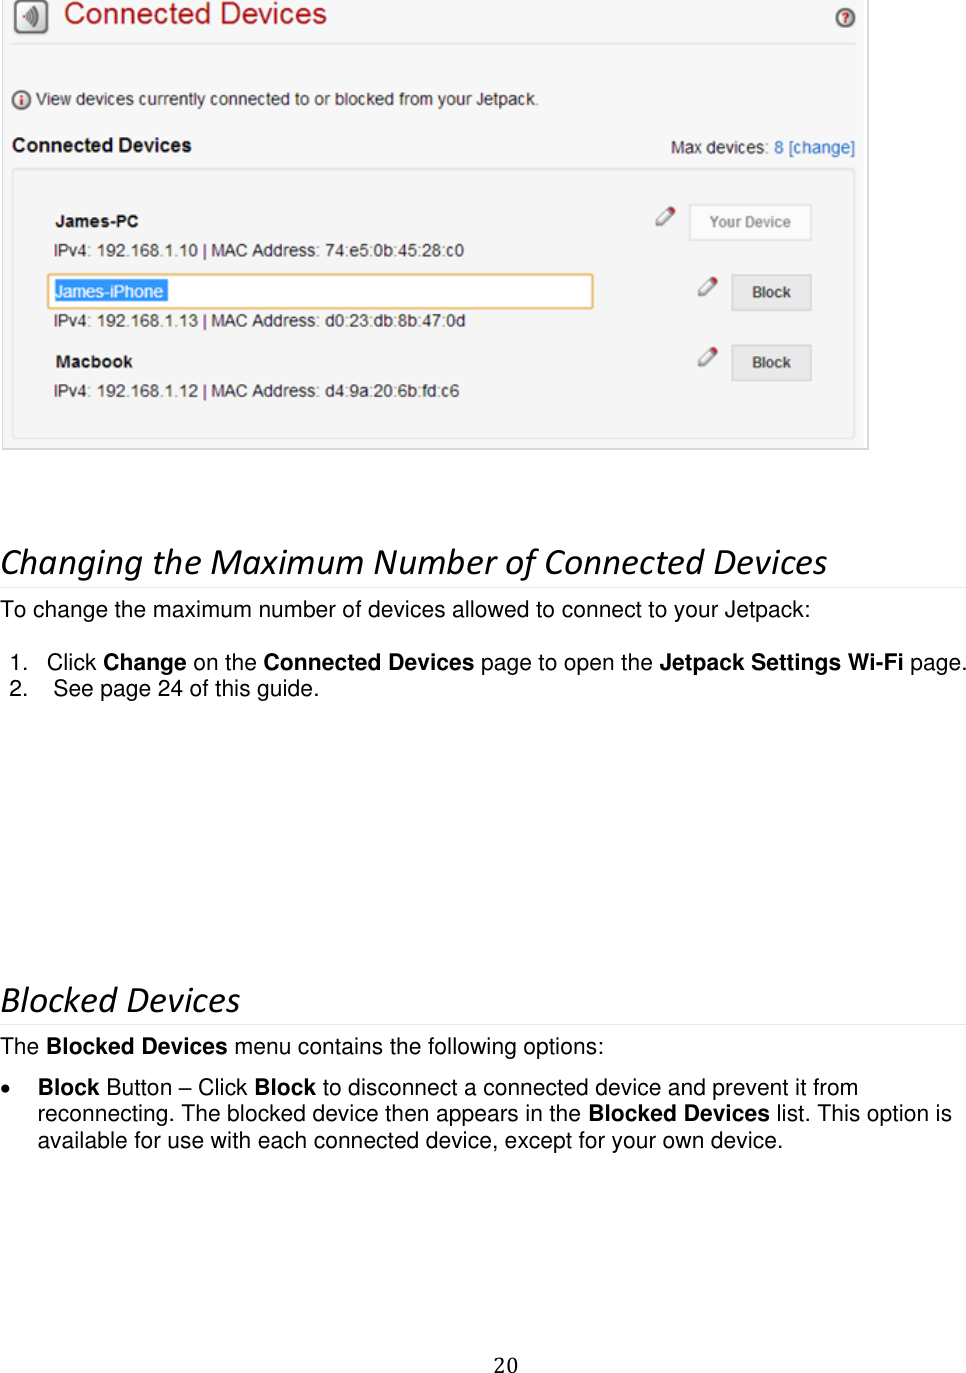   20    Changing the Maximum Number of Connected Devices To change the maximum number of devices allowed to connect to your Jetpack:  1.  Click Change on the Connected Devices page to open the Jetpack Settings Wi-Fi page. 2.   See page 24 of this guide.         Blocked Devices The Blocked Devices menu contains the following options:  Block Button – Click Block to disconnect a connected device and prevent it from reconnecting. The blocked device then appears in the Blocked Devices list. This option is available for use with each connected device, except for your own device. 